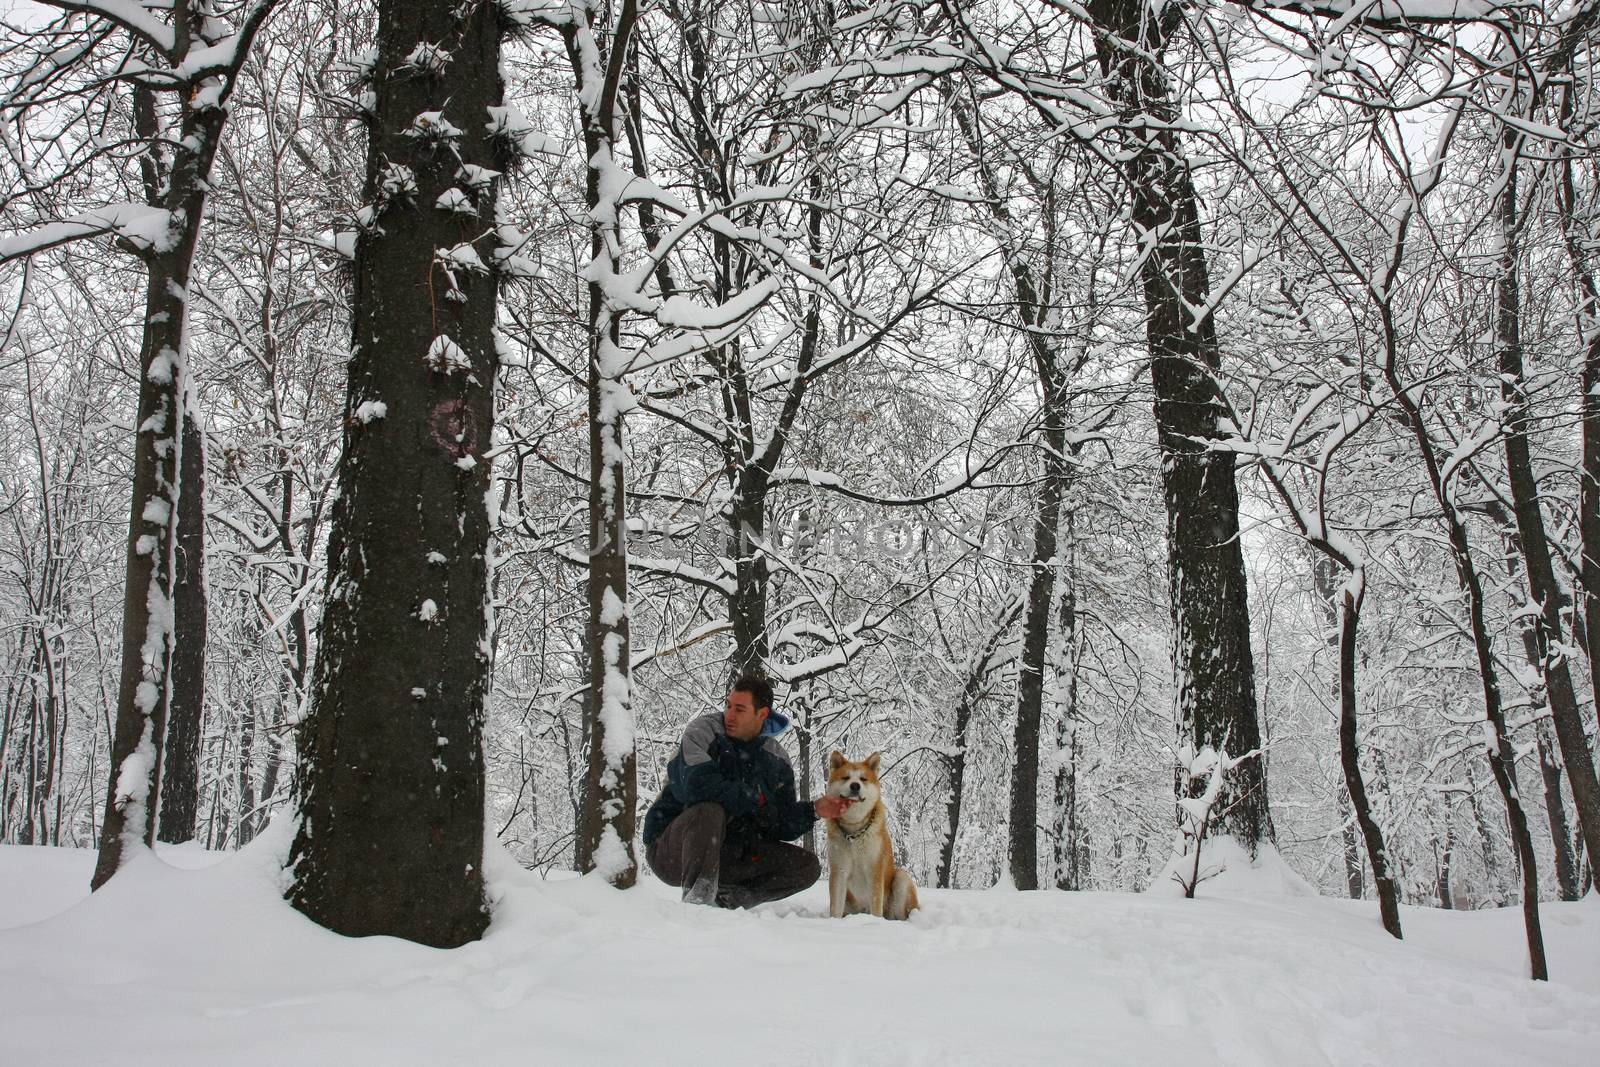 Man and dog in the snow by tdjoric